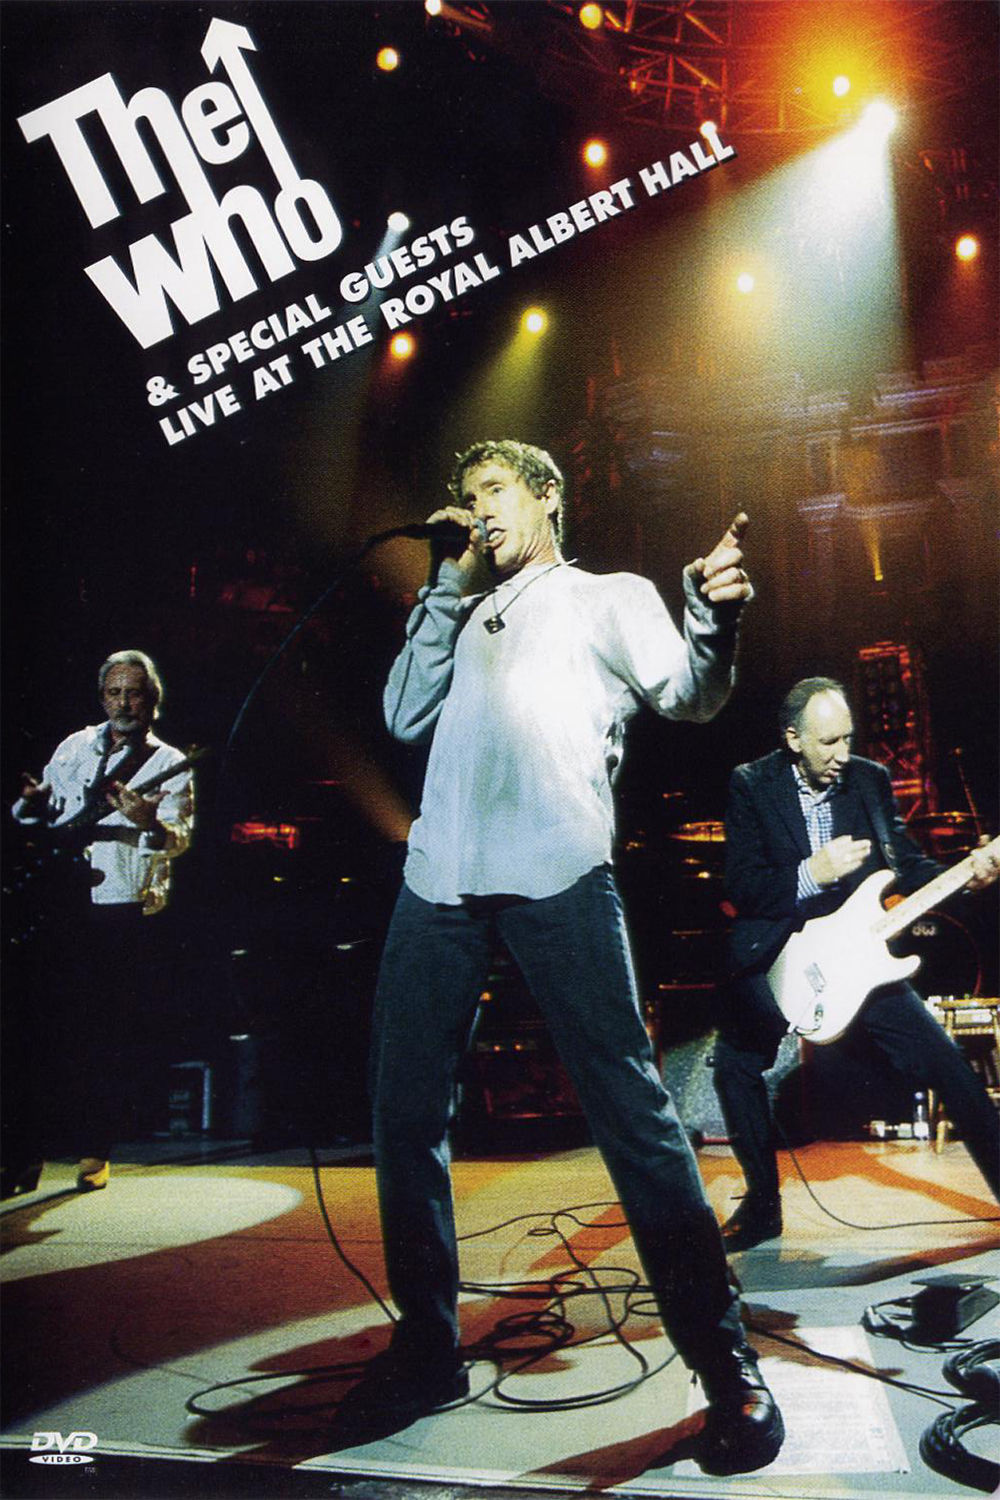 affiche du film The Who & Special Guests: Live at the Royal Albert Hall